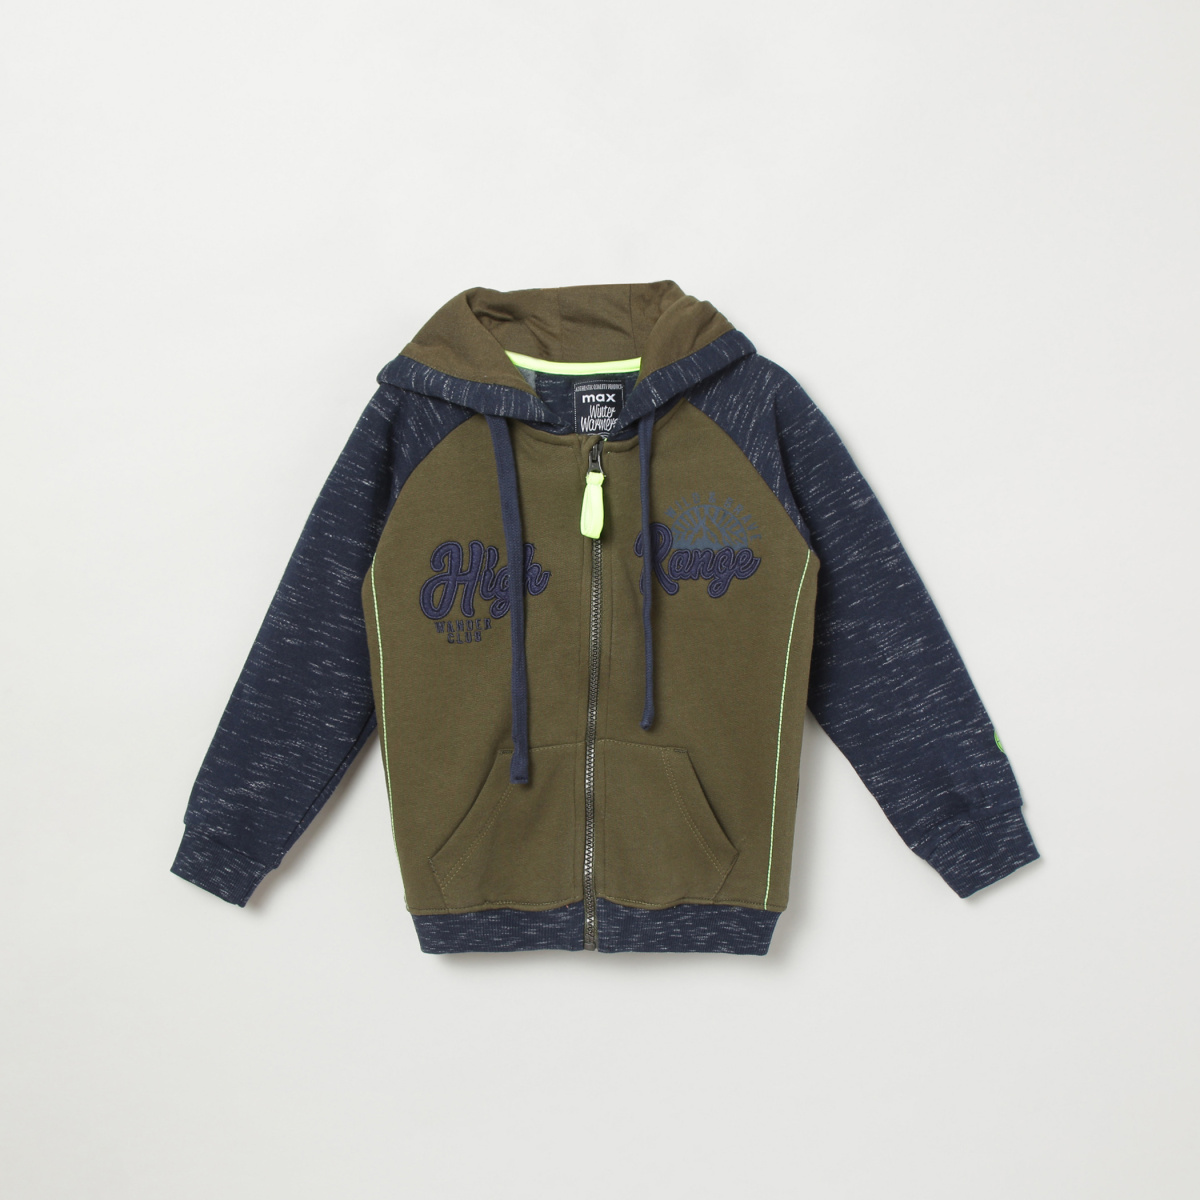 MAX Appliqued Hooded Jacket with Zip-Closure